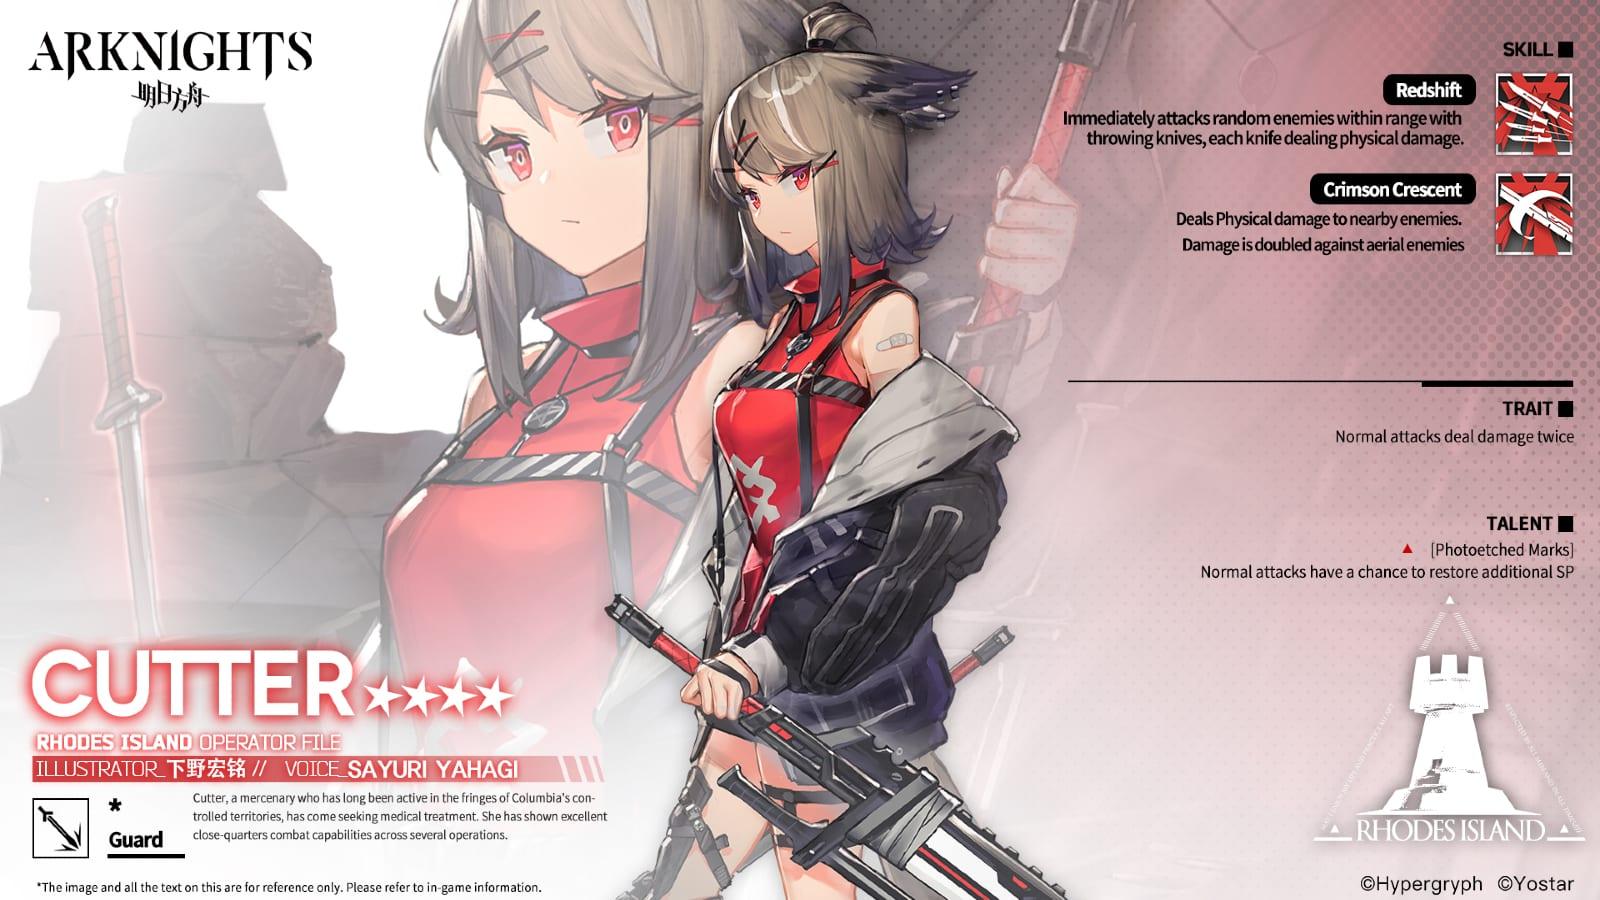 Cutter is a 4-star rarity operator in Arknights